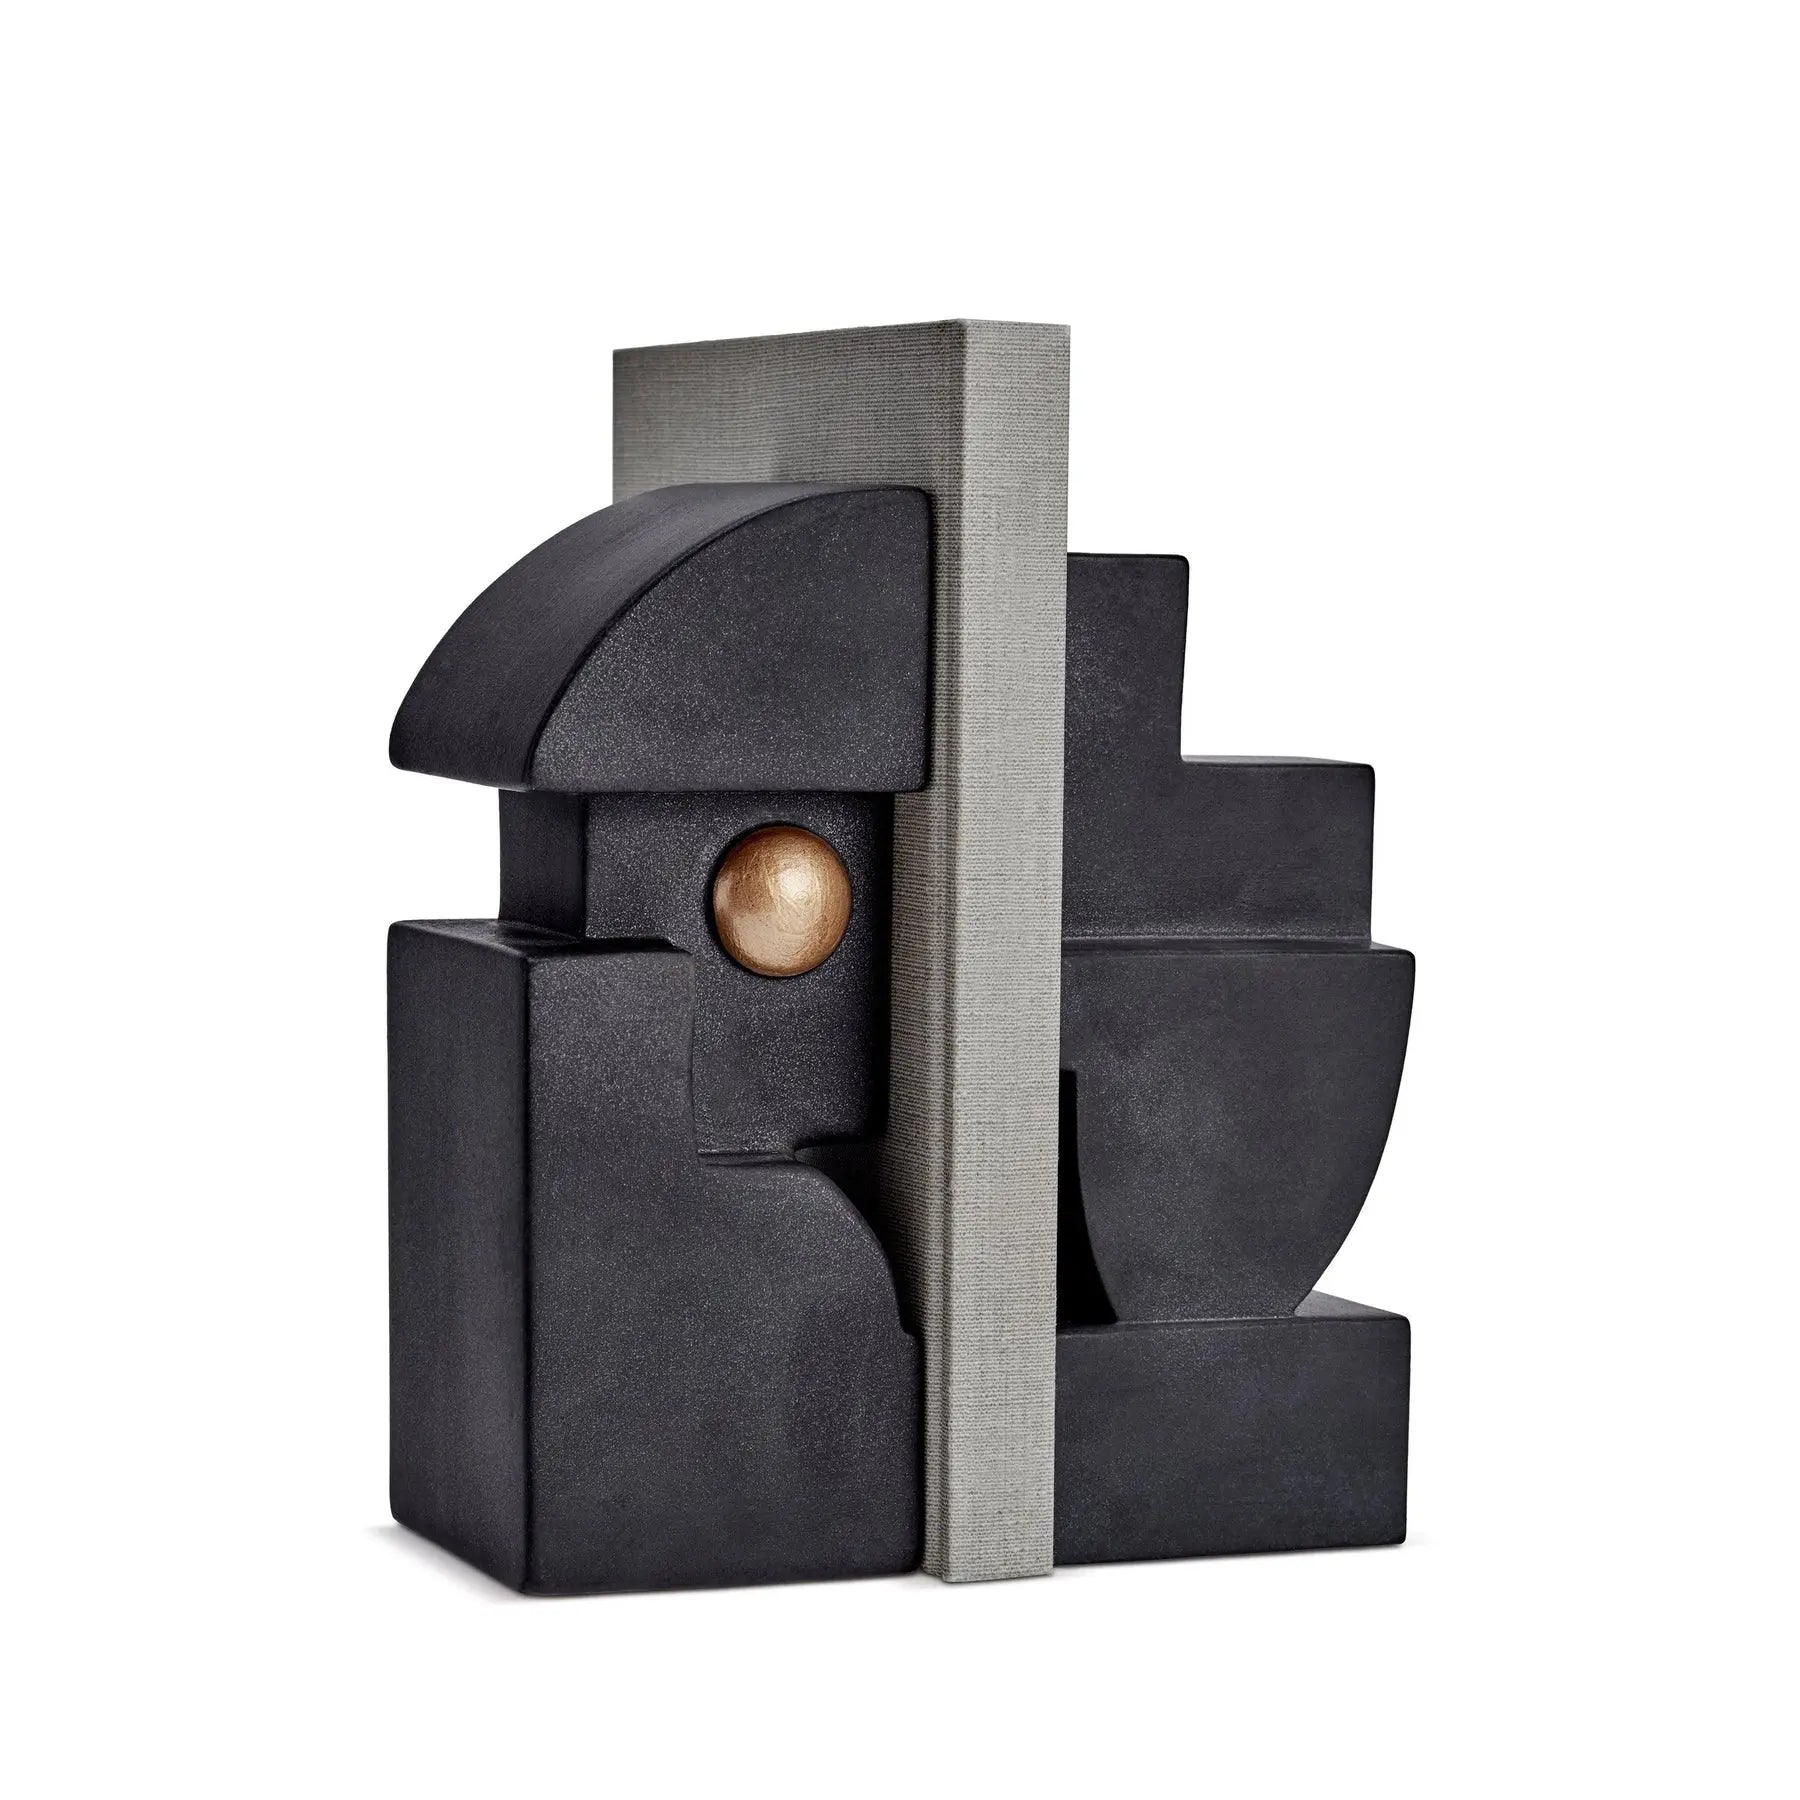 L'Objet Cubisme Bookend one and Cubisme bookend two with books